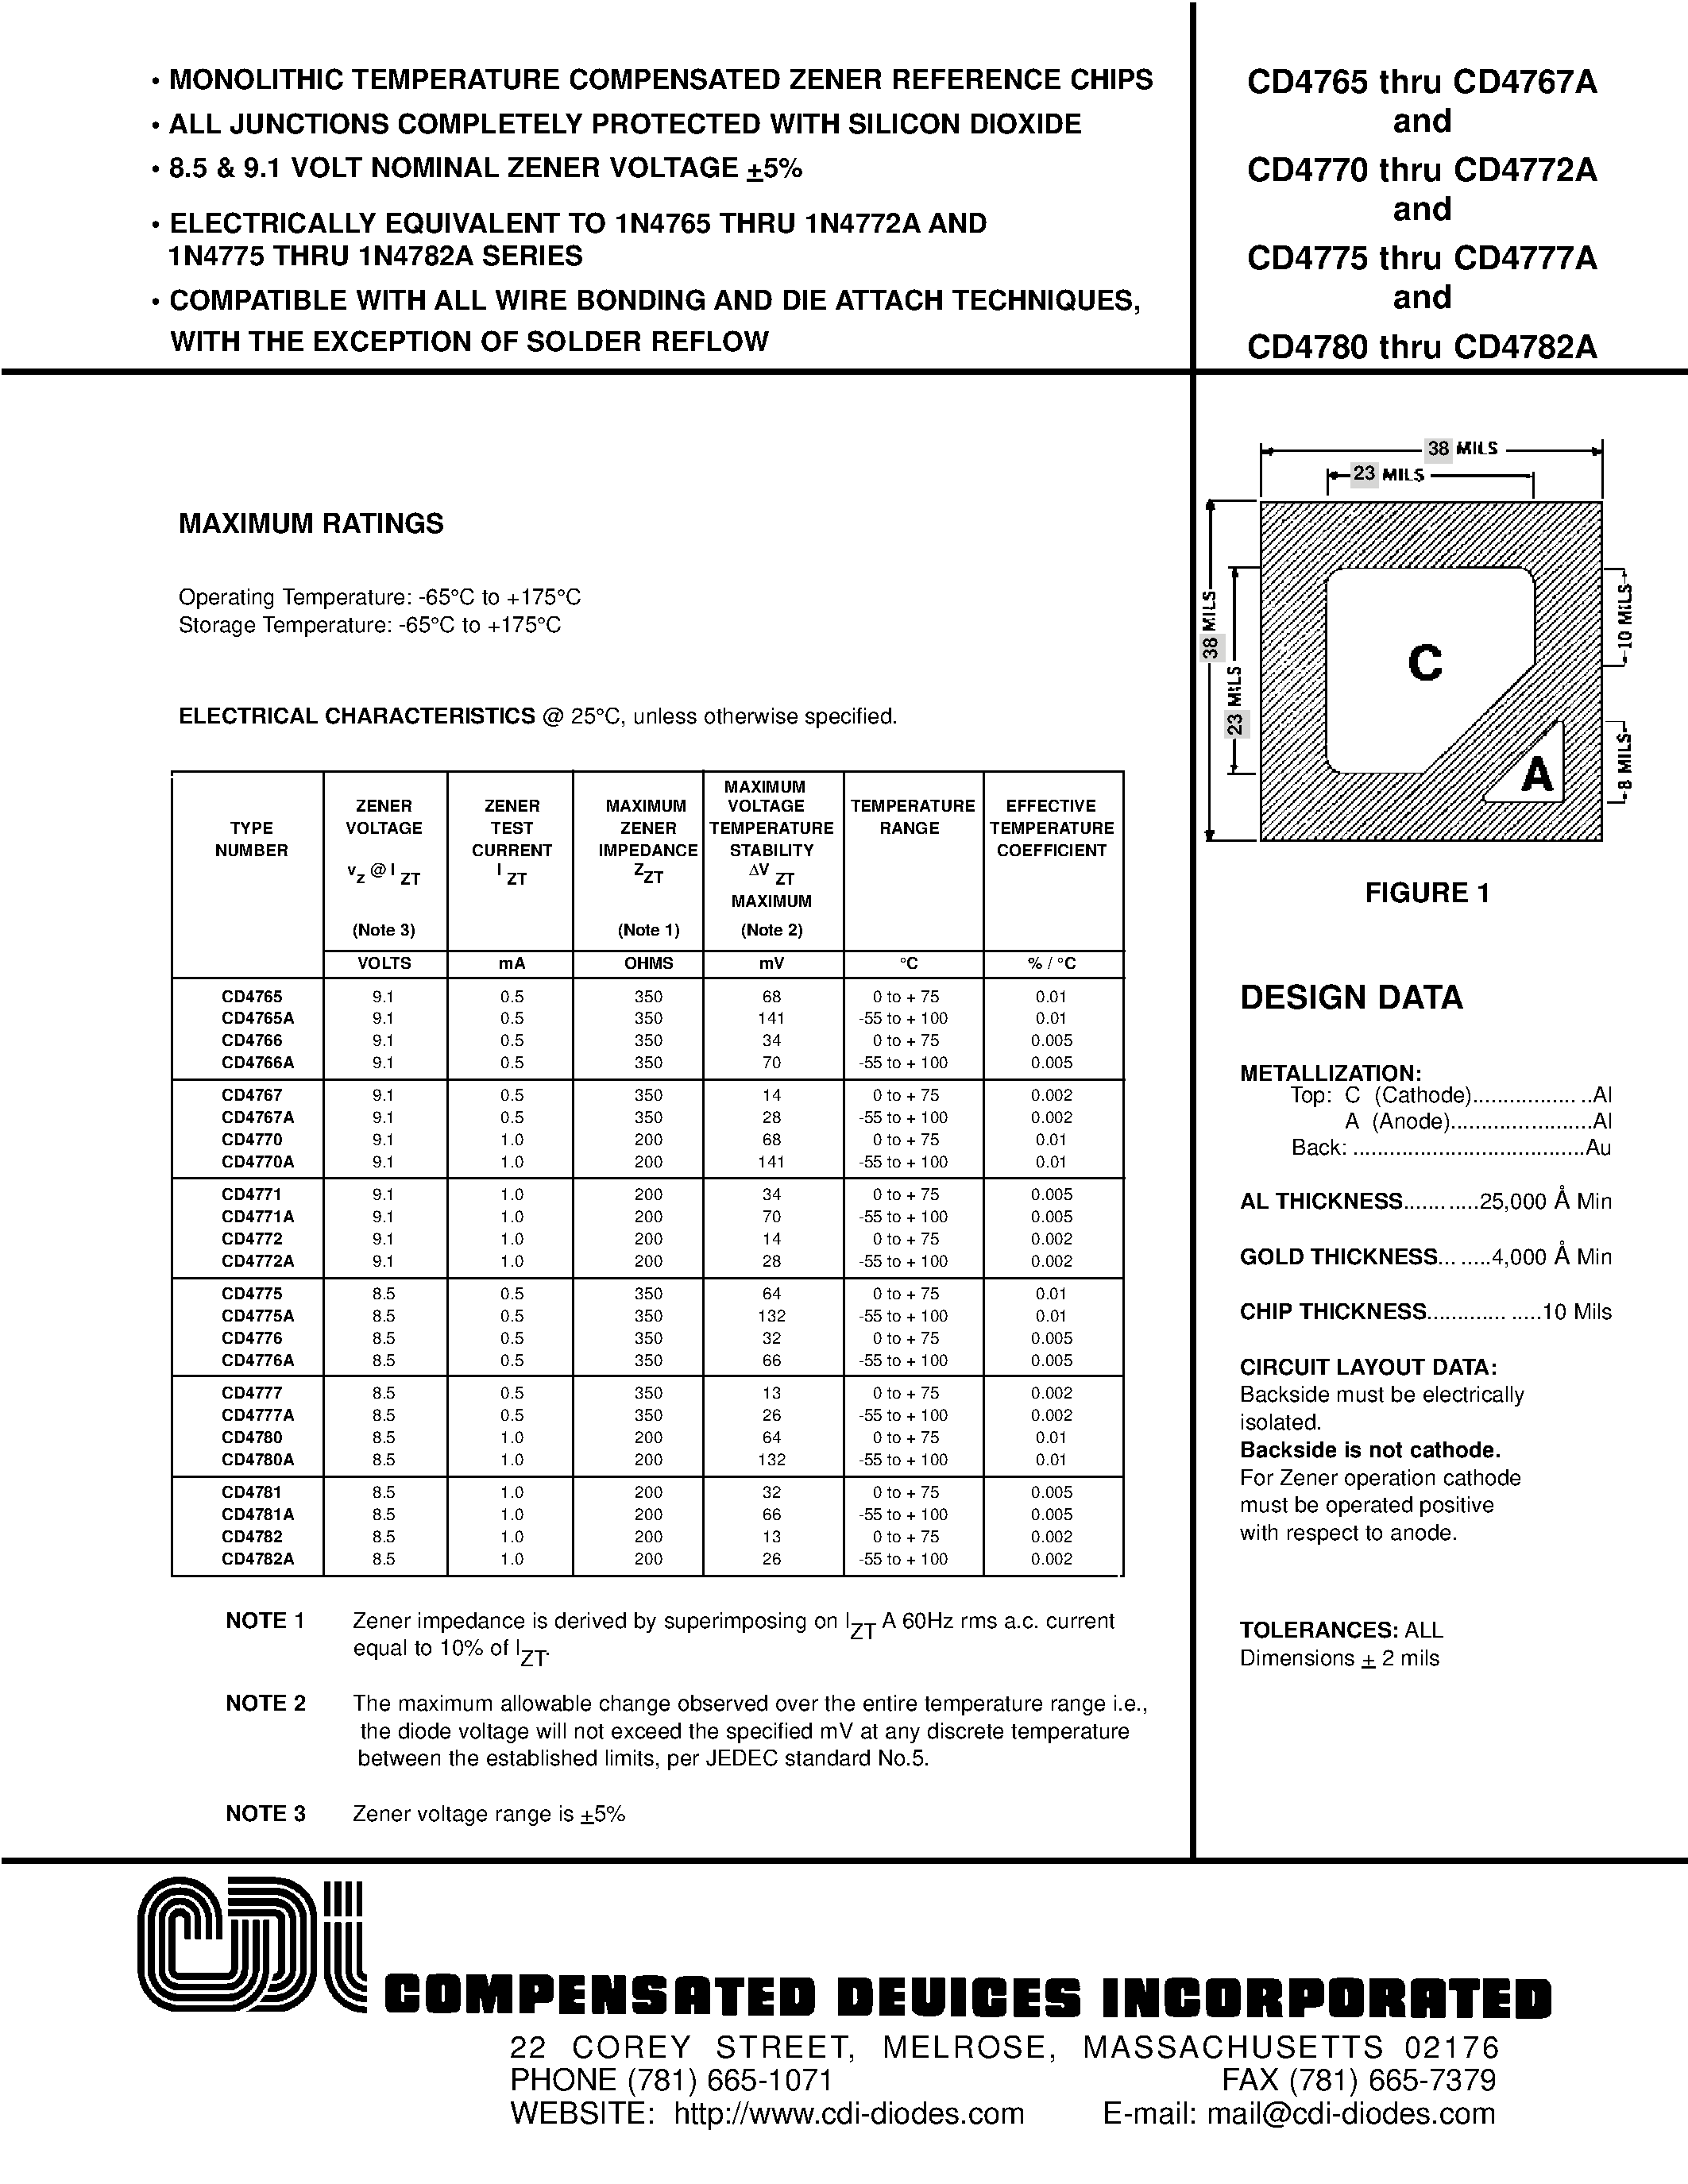 Datasheet CD4781 - MONOLITHIC TEMPERATURE COMPENSATED ZENER REFERENCE CHIPS page 1